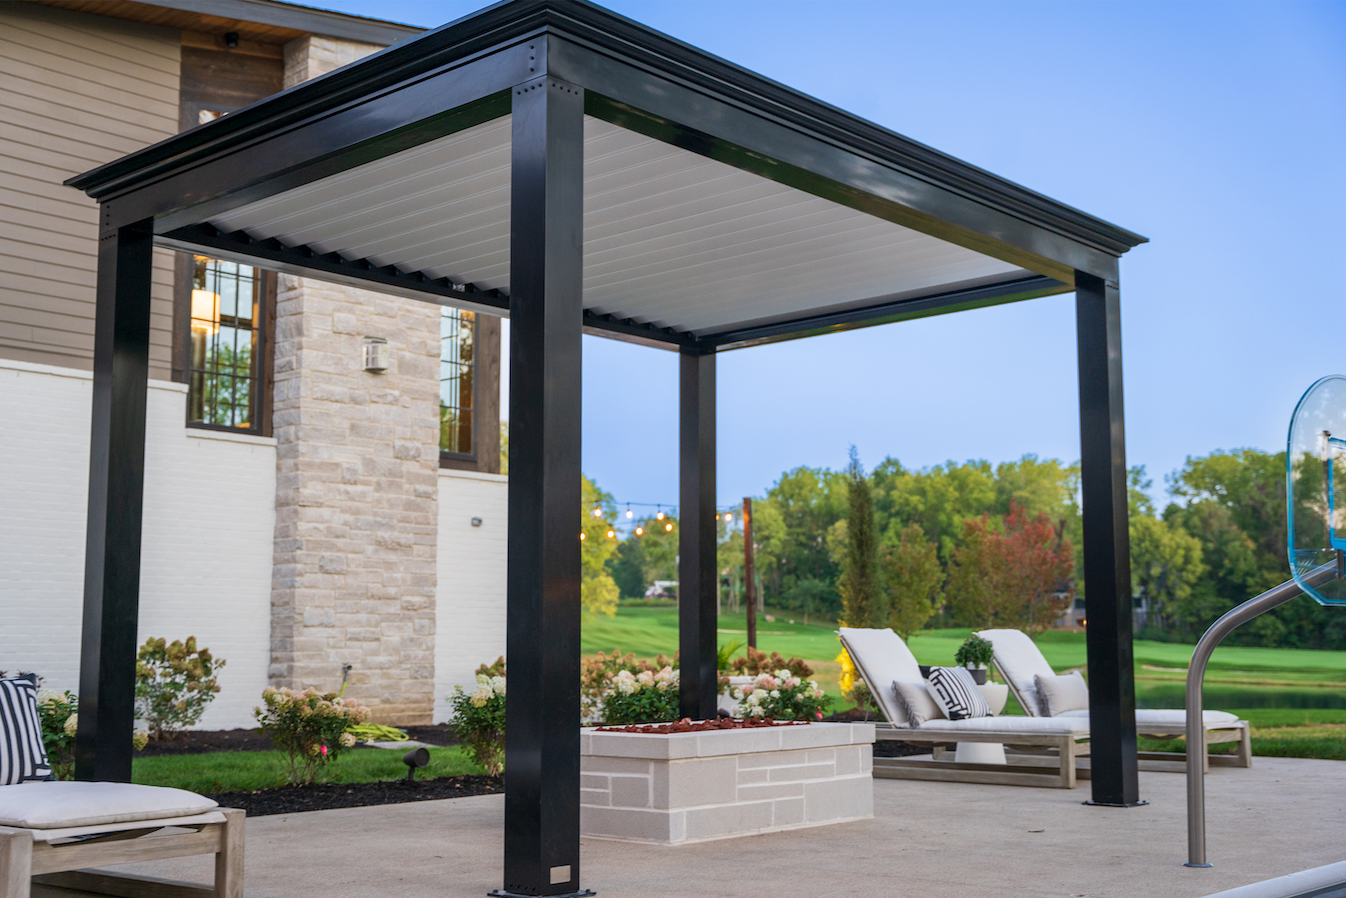 Outdoor kitchens are an easy way to entertain guests.  Pergolas provide a seamless transition from your indoor to outdoor living space.